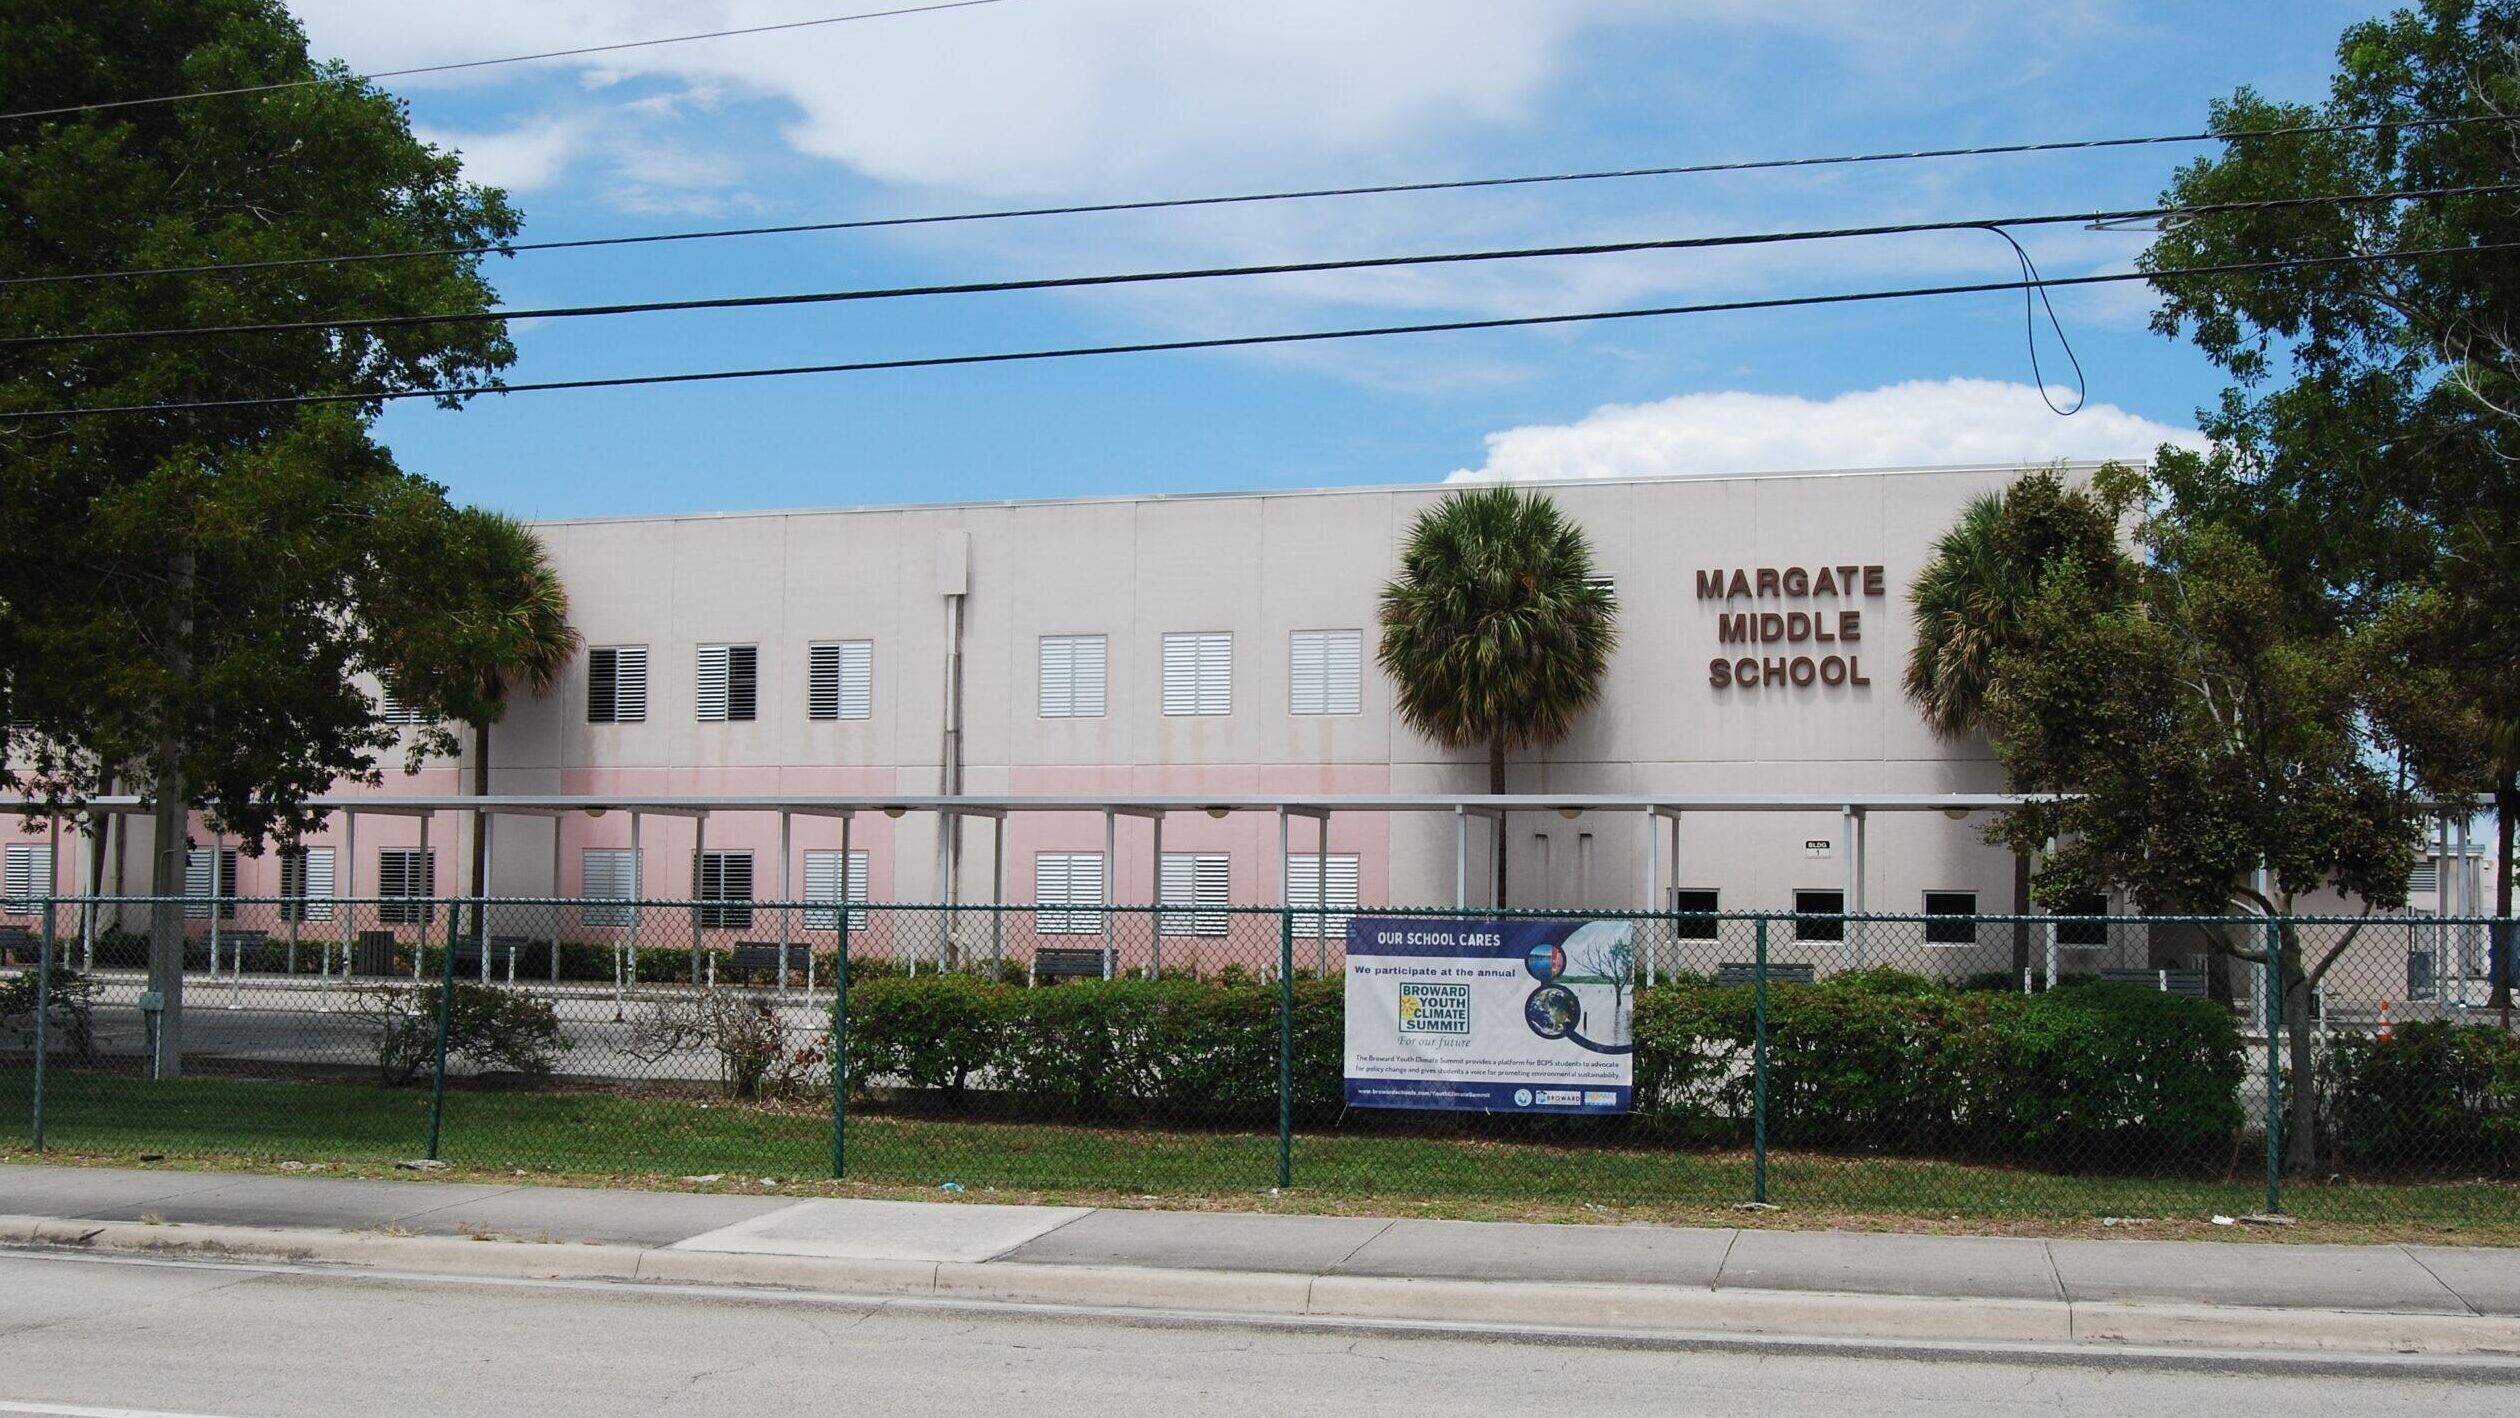 Margate Middle School.